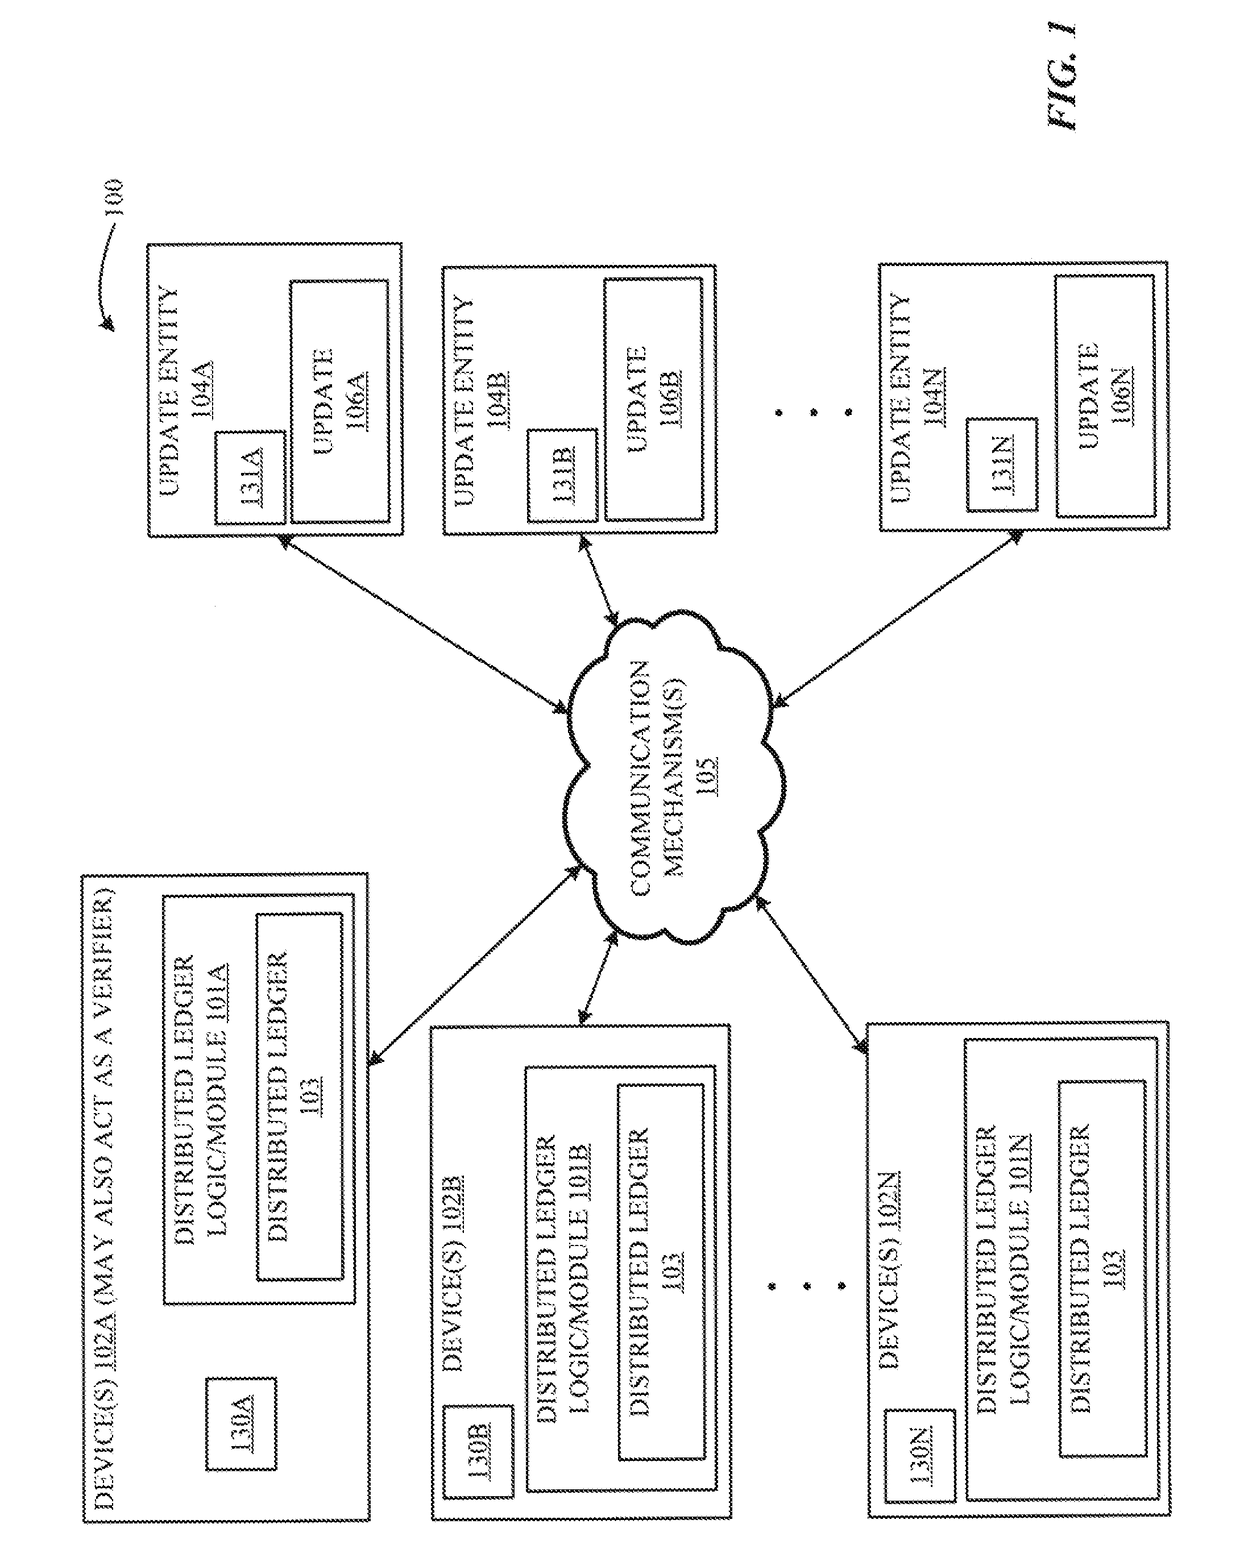 Device-driven auto-recovery using multiple recovery sources